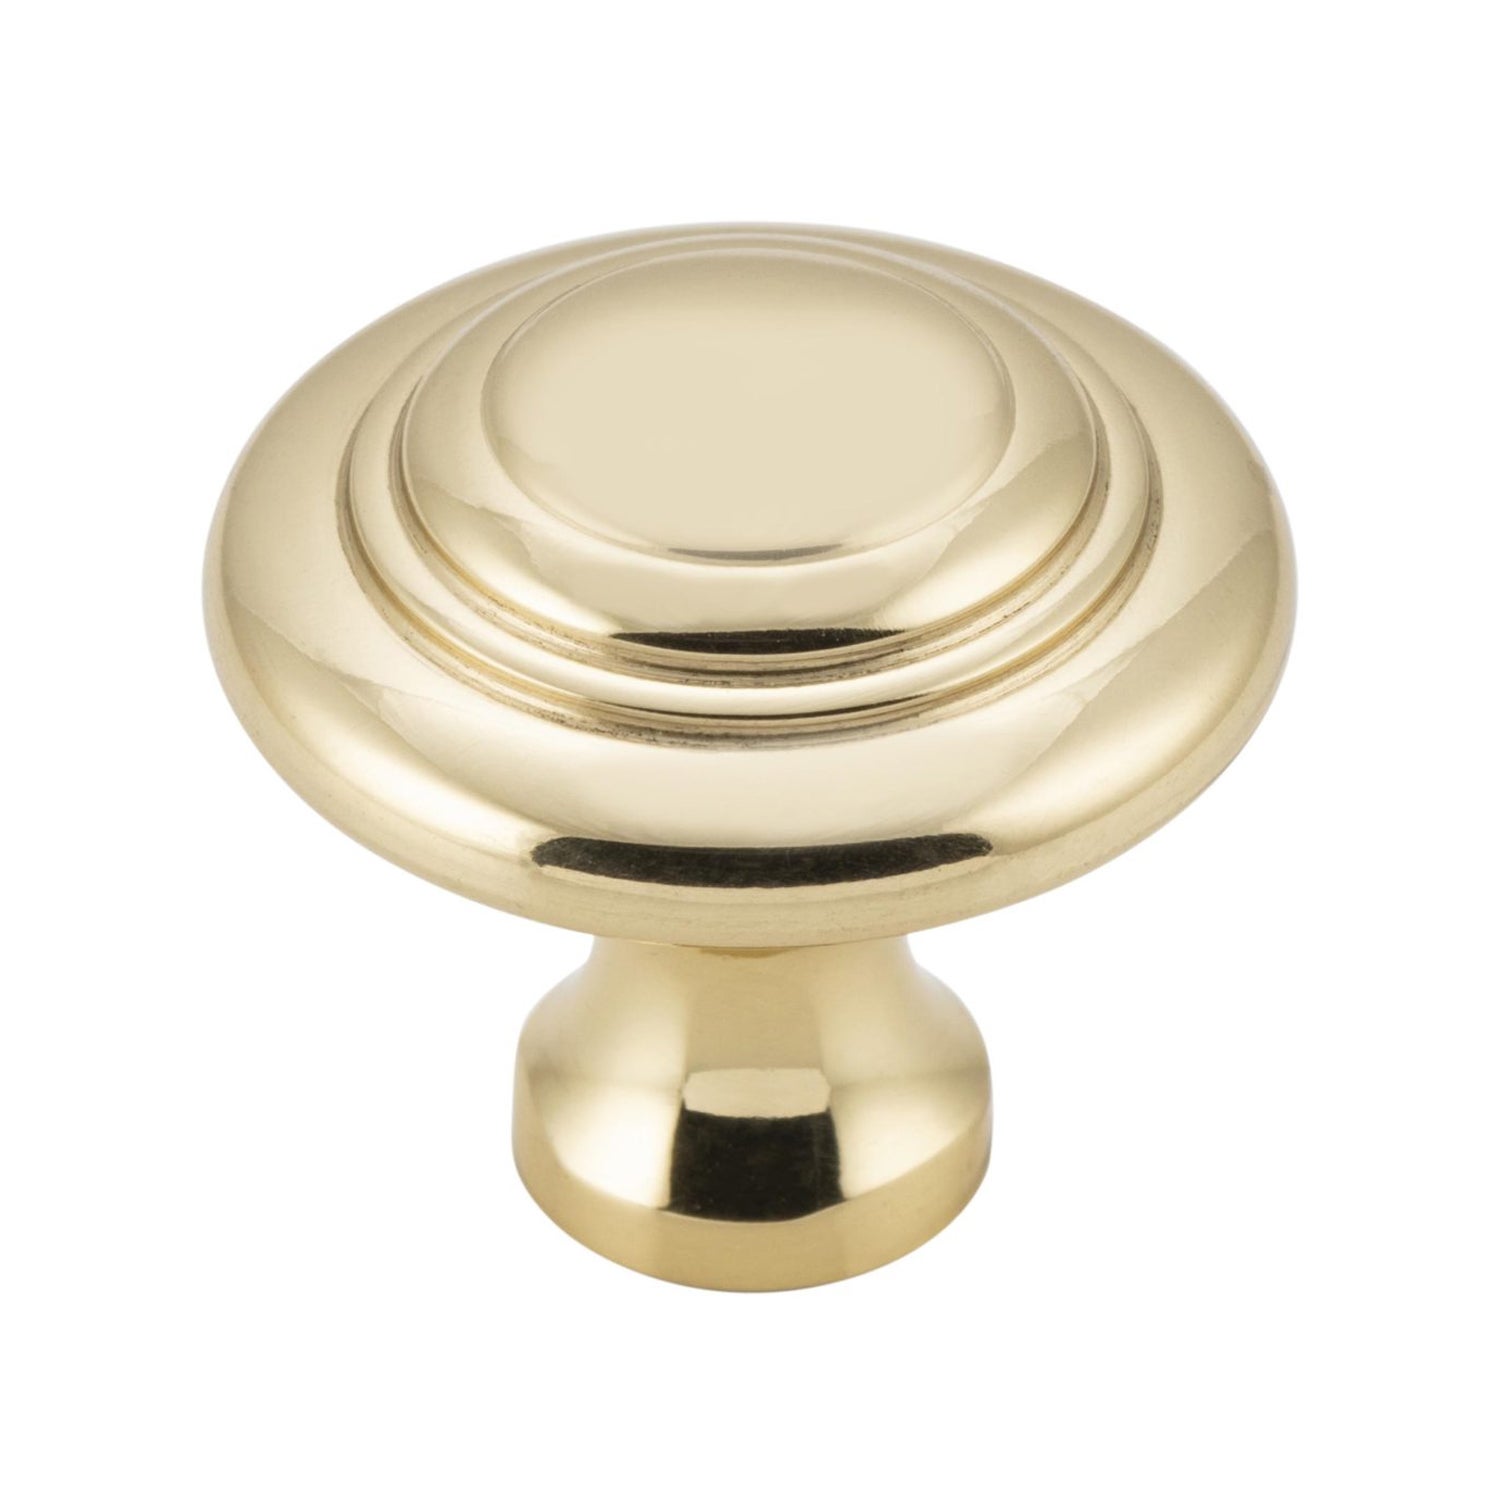 Tradco Domed Cupboard Cabinet Knob - Available In Various Finishes and Sizes